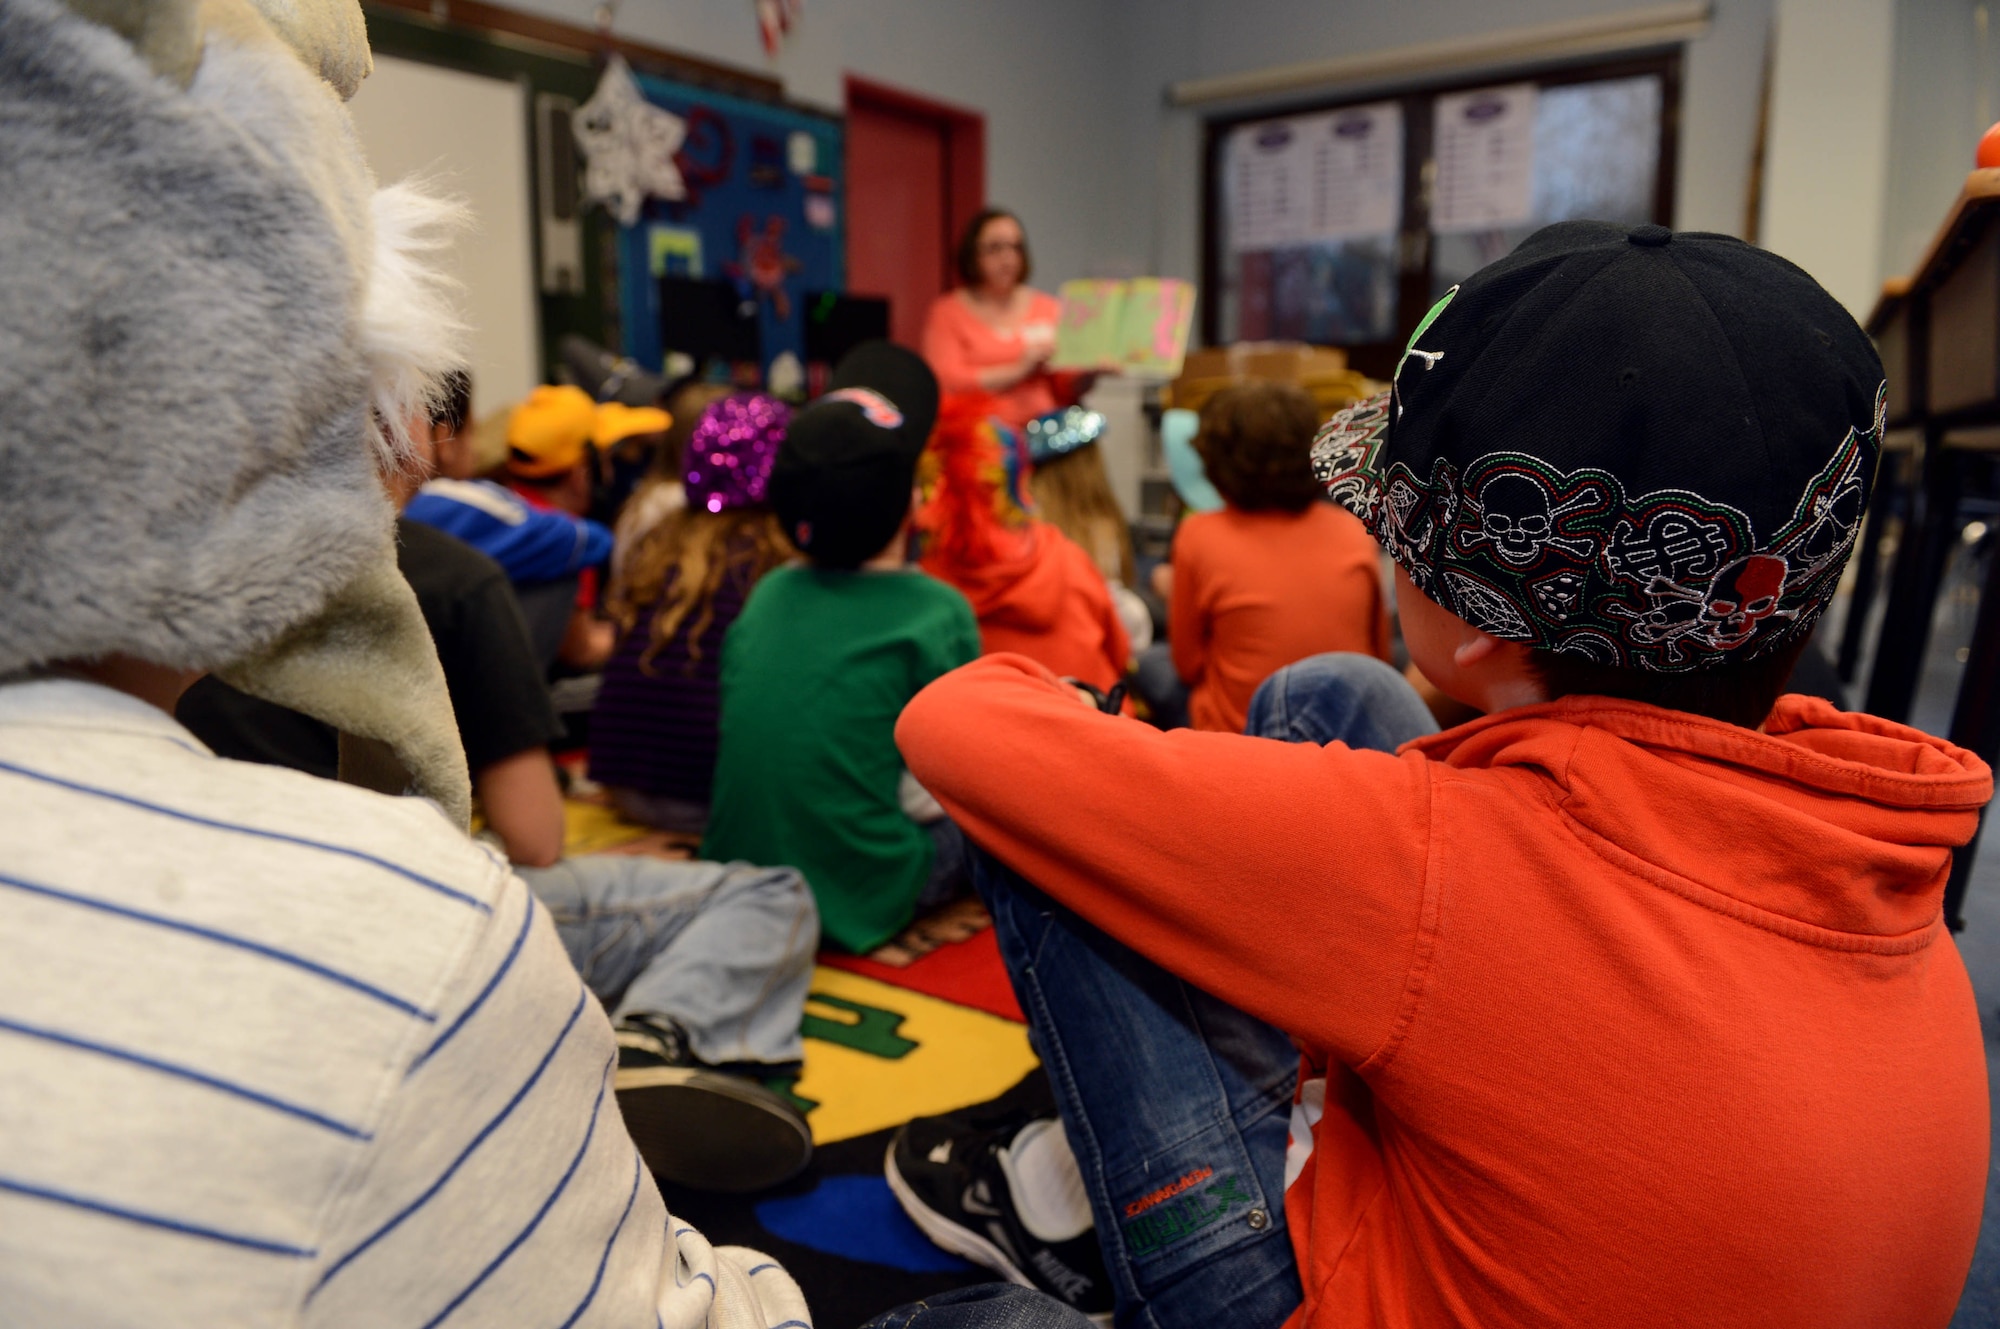 Spangdahlem Elementary students listen to a volunteer read a Dr. Seuss book during a Read Across America event at Spangdahlem Air Base, Germany, March 3, 2014. National Read Across America began in 1998 when the National Education Association pushed for a day to celebrate reading. (U.S. Air Force photo by Airman 1st Class Kyle Gese/Released)